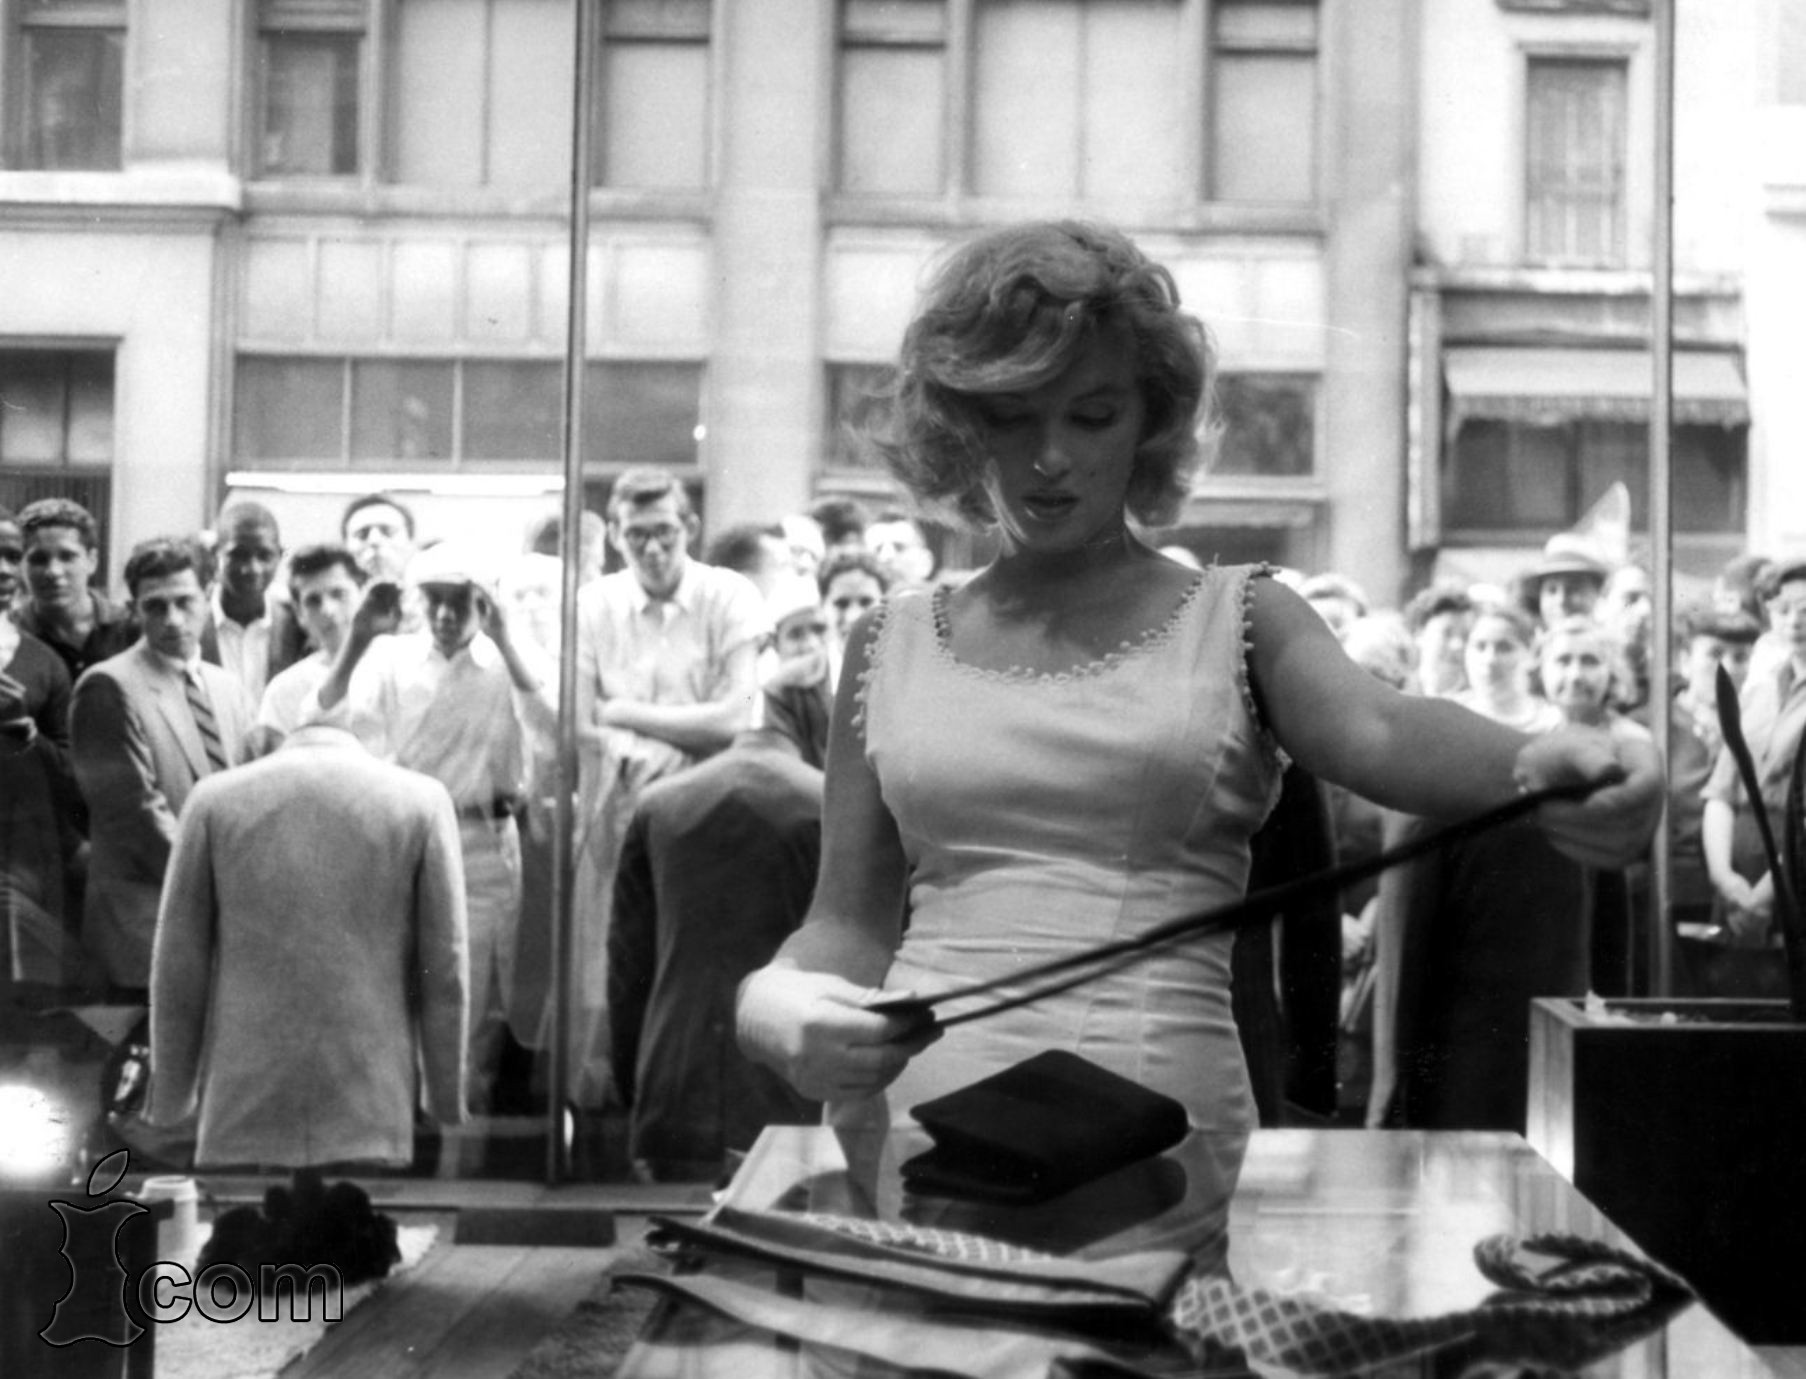 Marilyn Monroe tries to go shopping while fans and media watch, 1957